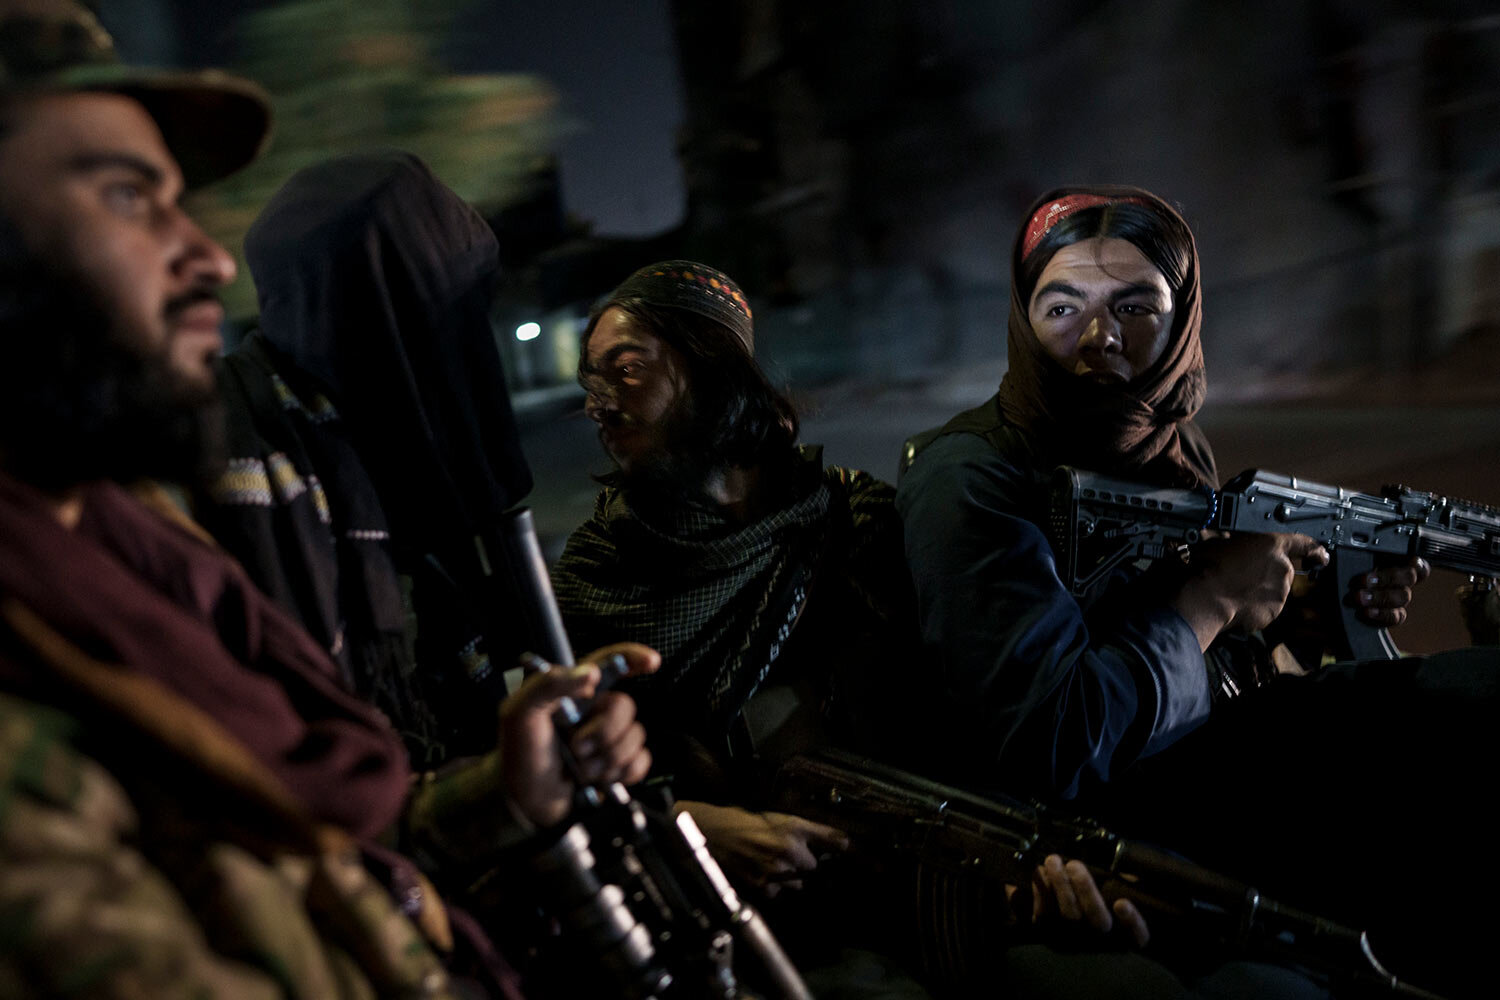  Taliban fighters ride in the back of a vehicle during a night patrol in Kabul, Afghanistan, Sunday, Sept. 12, 2021. (AP Photo/Felipe Dana) 